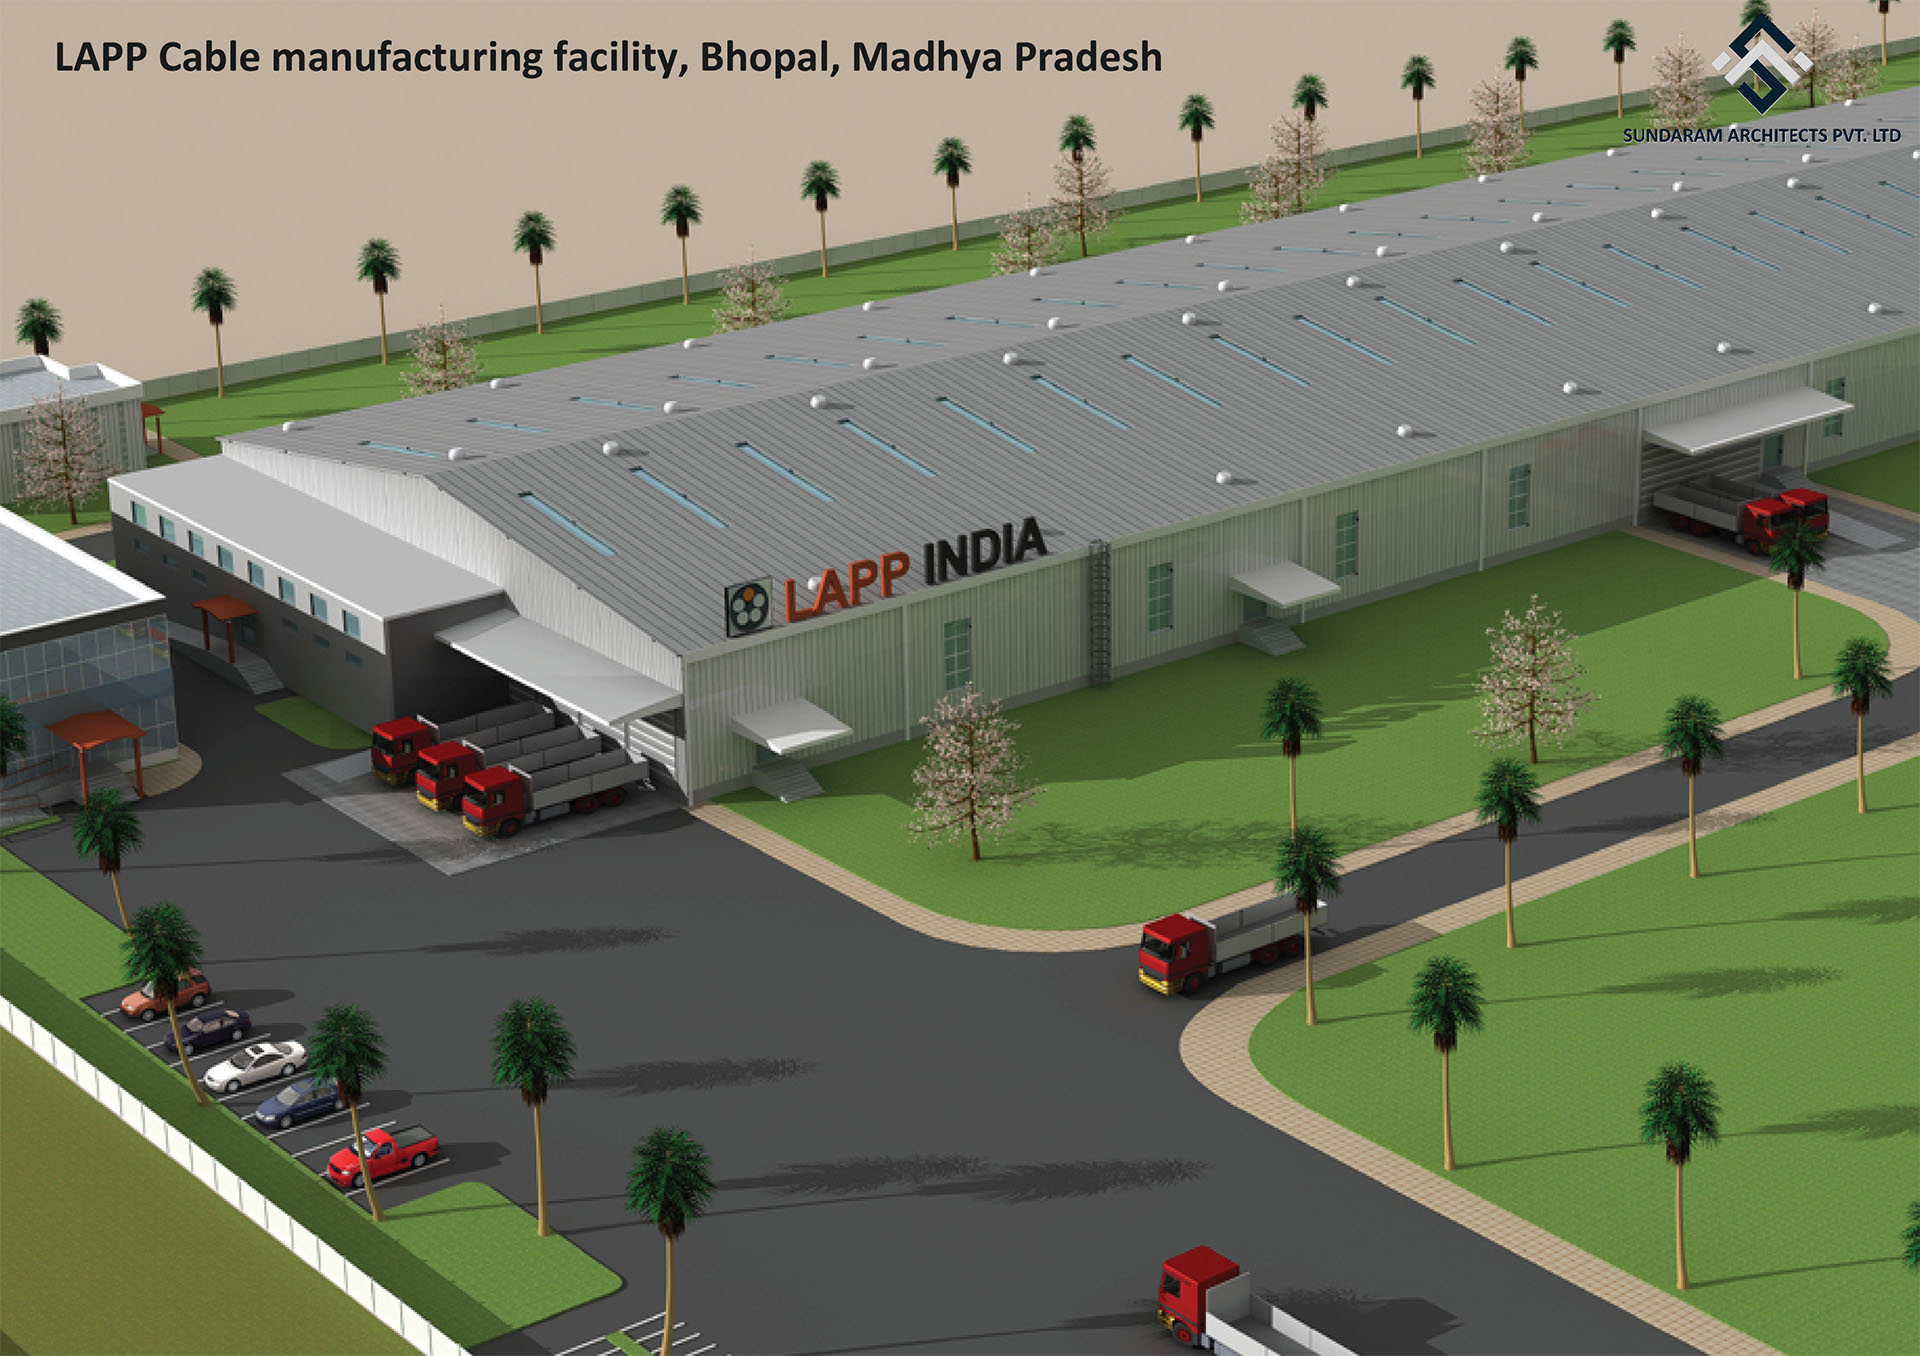 LAPP Cable Manufacturing Facility, Bhopal, Madhya Pradesh - Industrial & Manufacturing Design